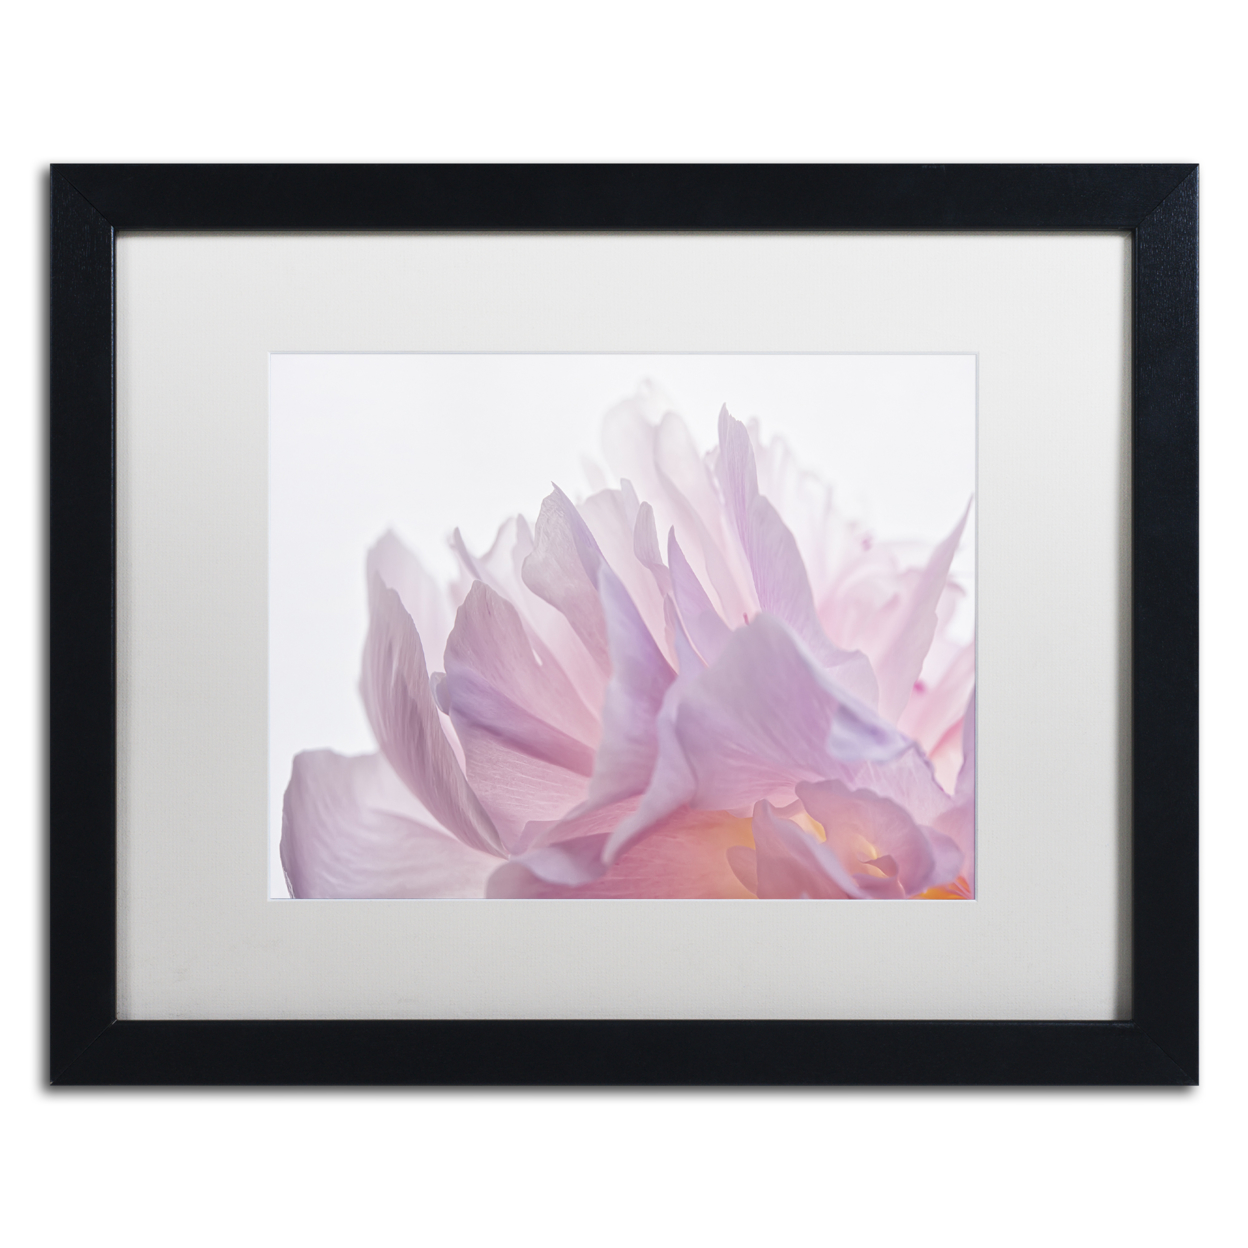 Cora Niele 'Pink Peony Petals VI' Black Wooden Framed Art 18 X 22 Inches